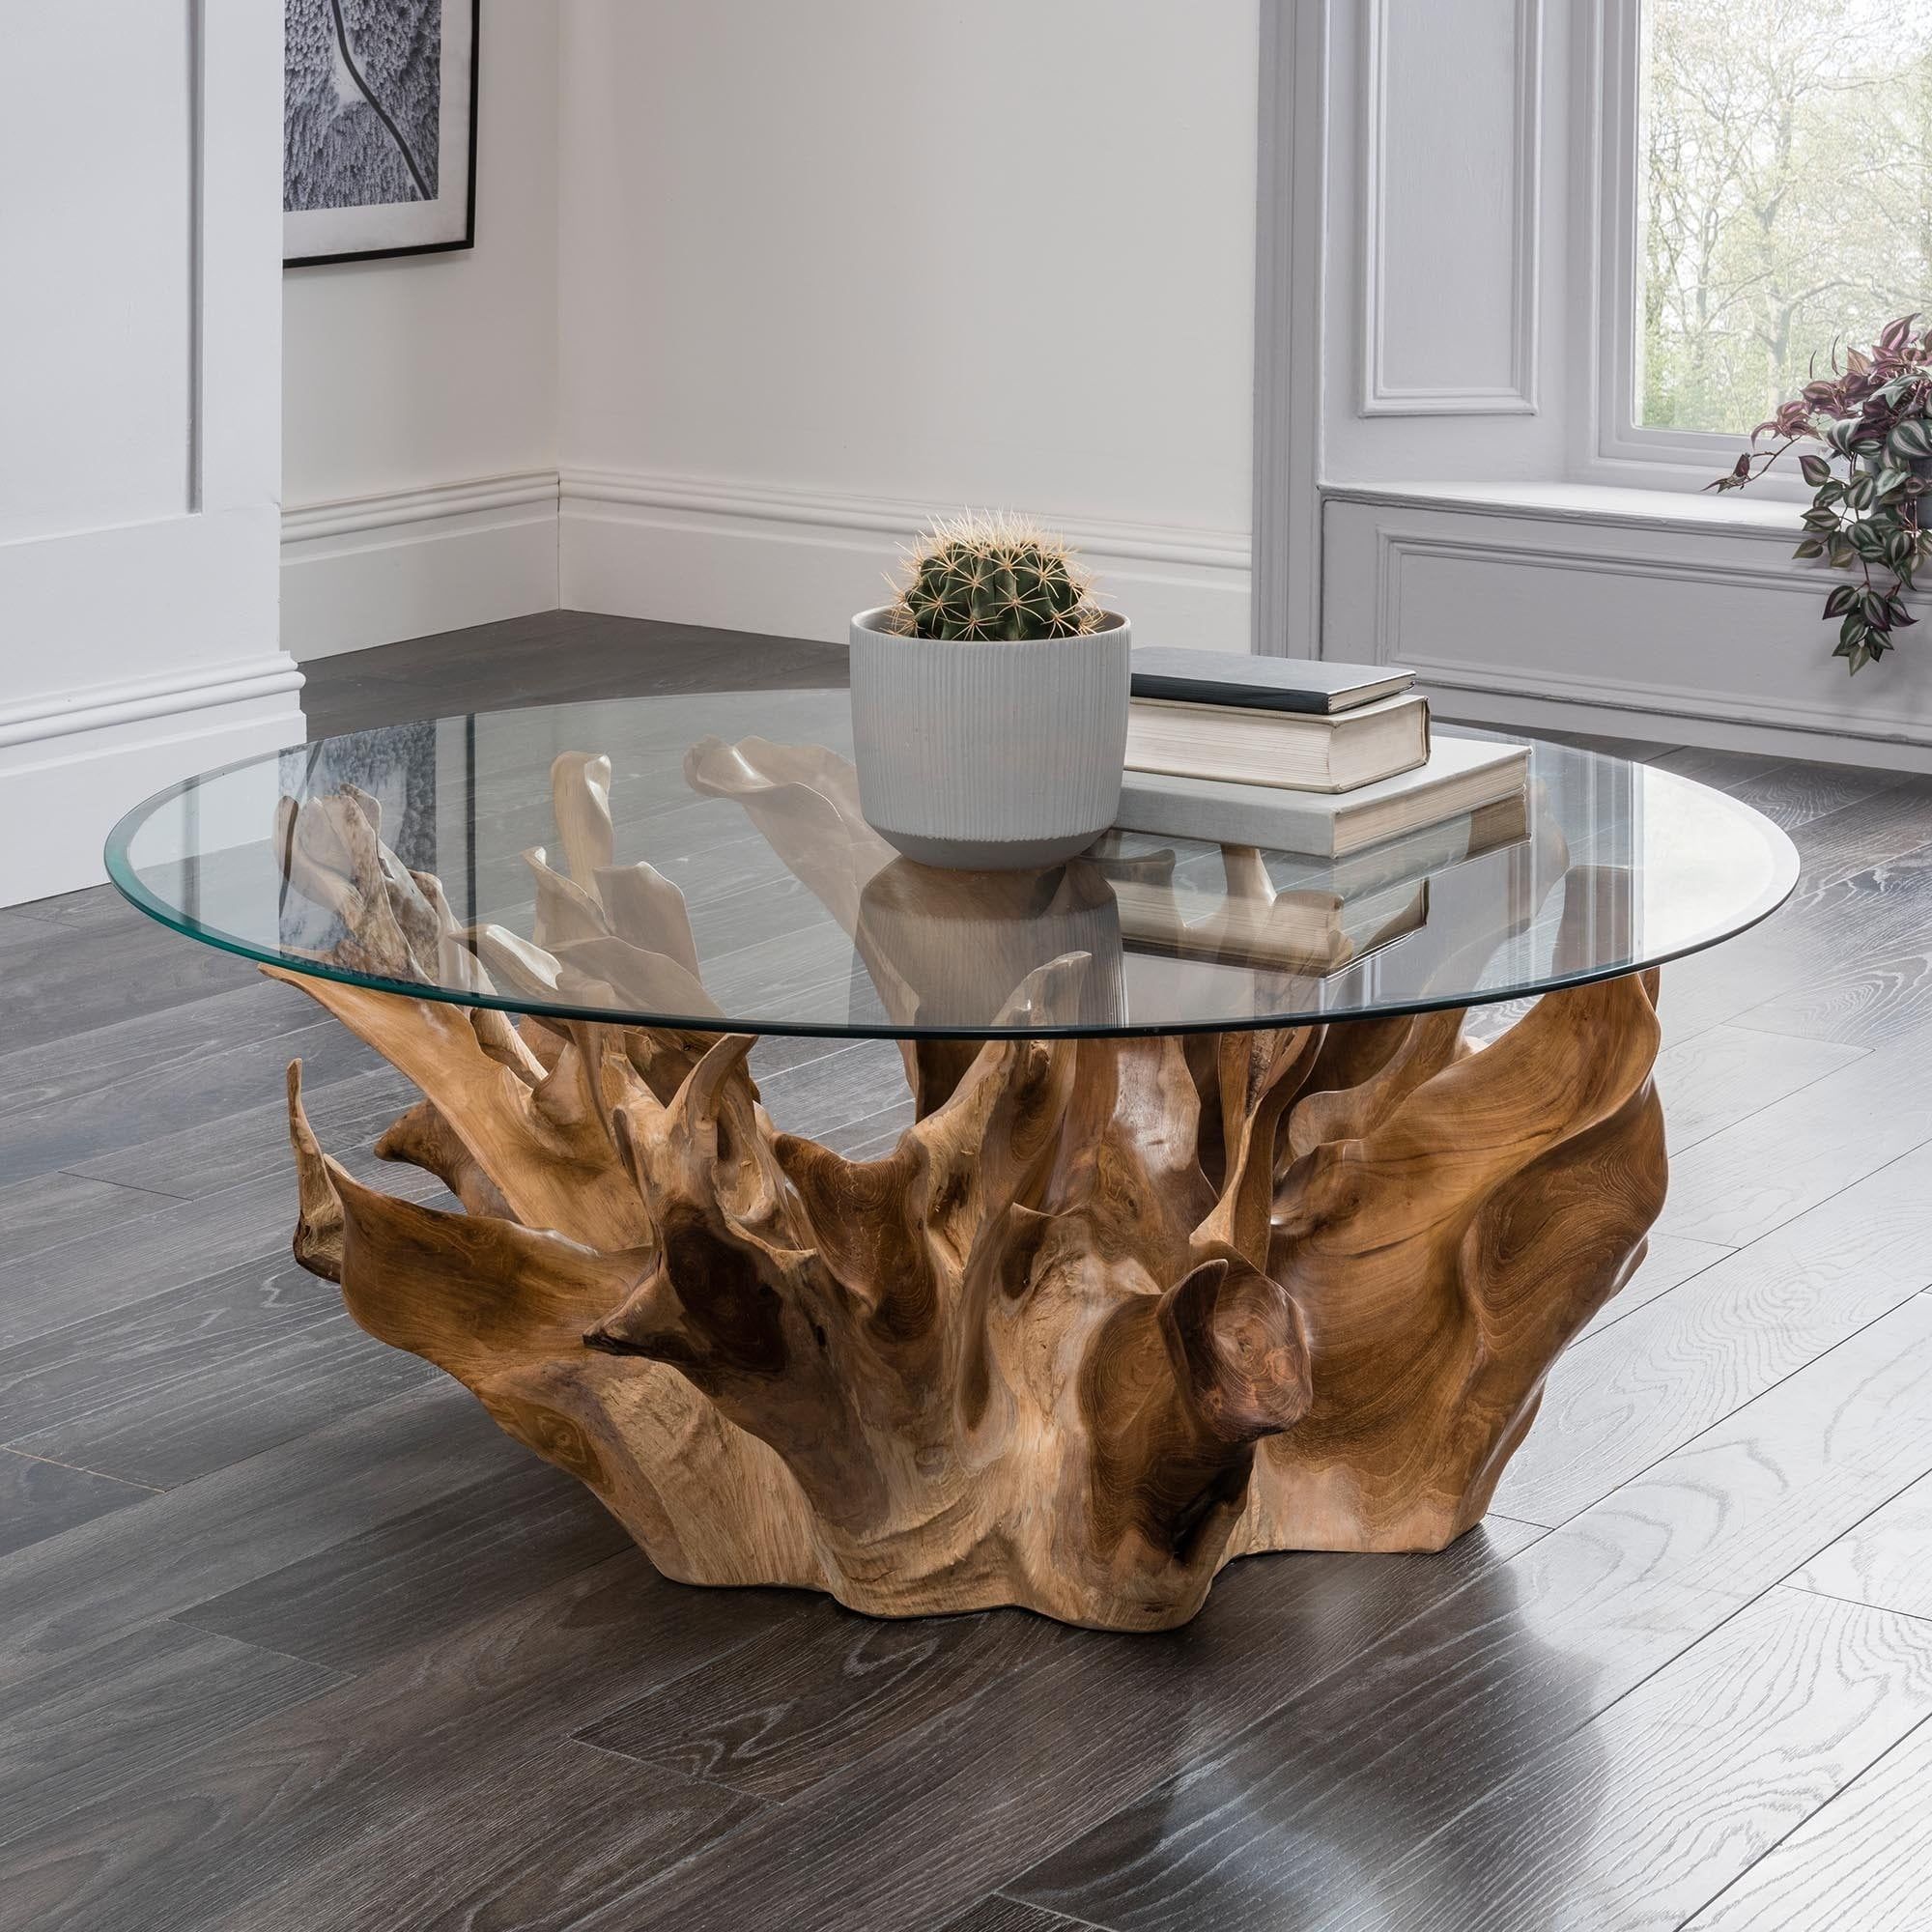 Round Teak Root Coffee Table High Quality Teak From – Etsy Intended For Teak Coffee Tables (View 6 of 20)